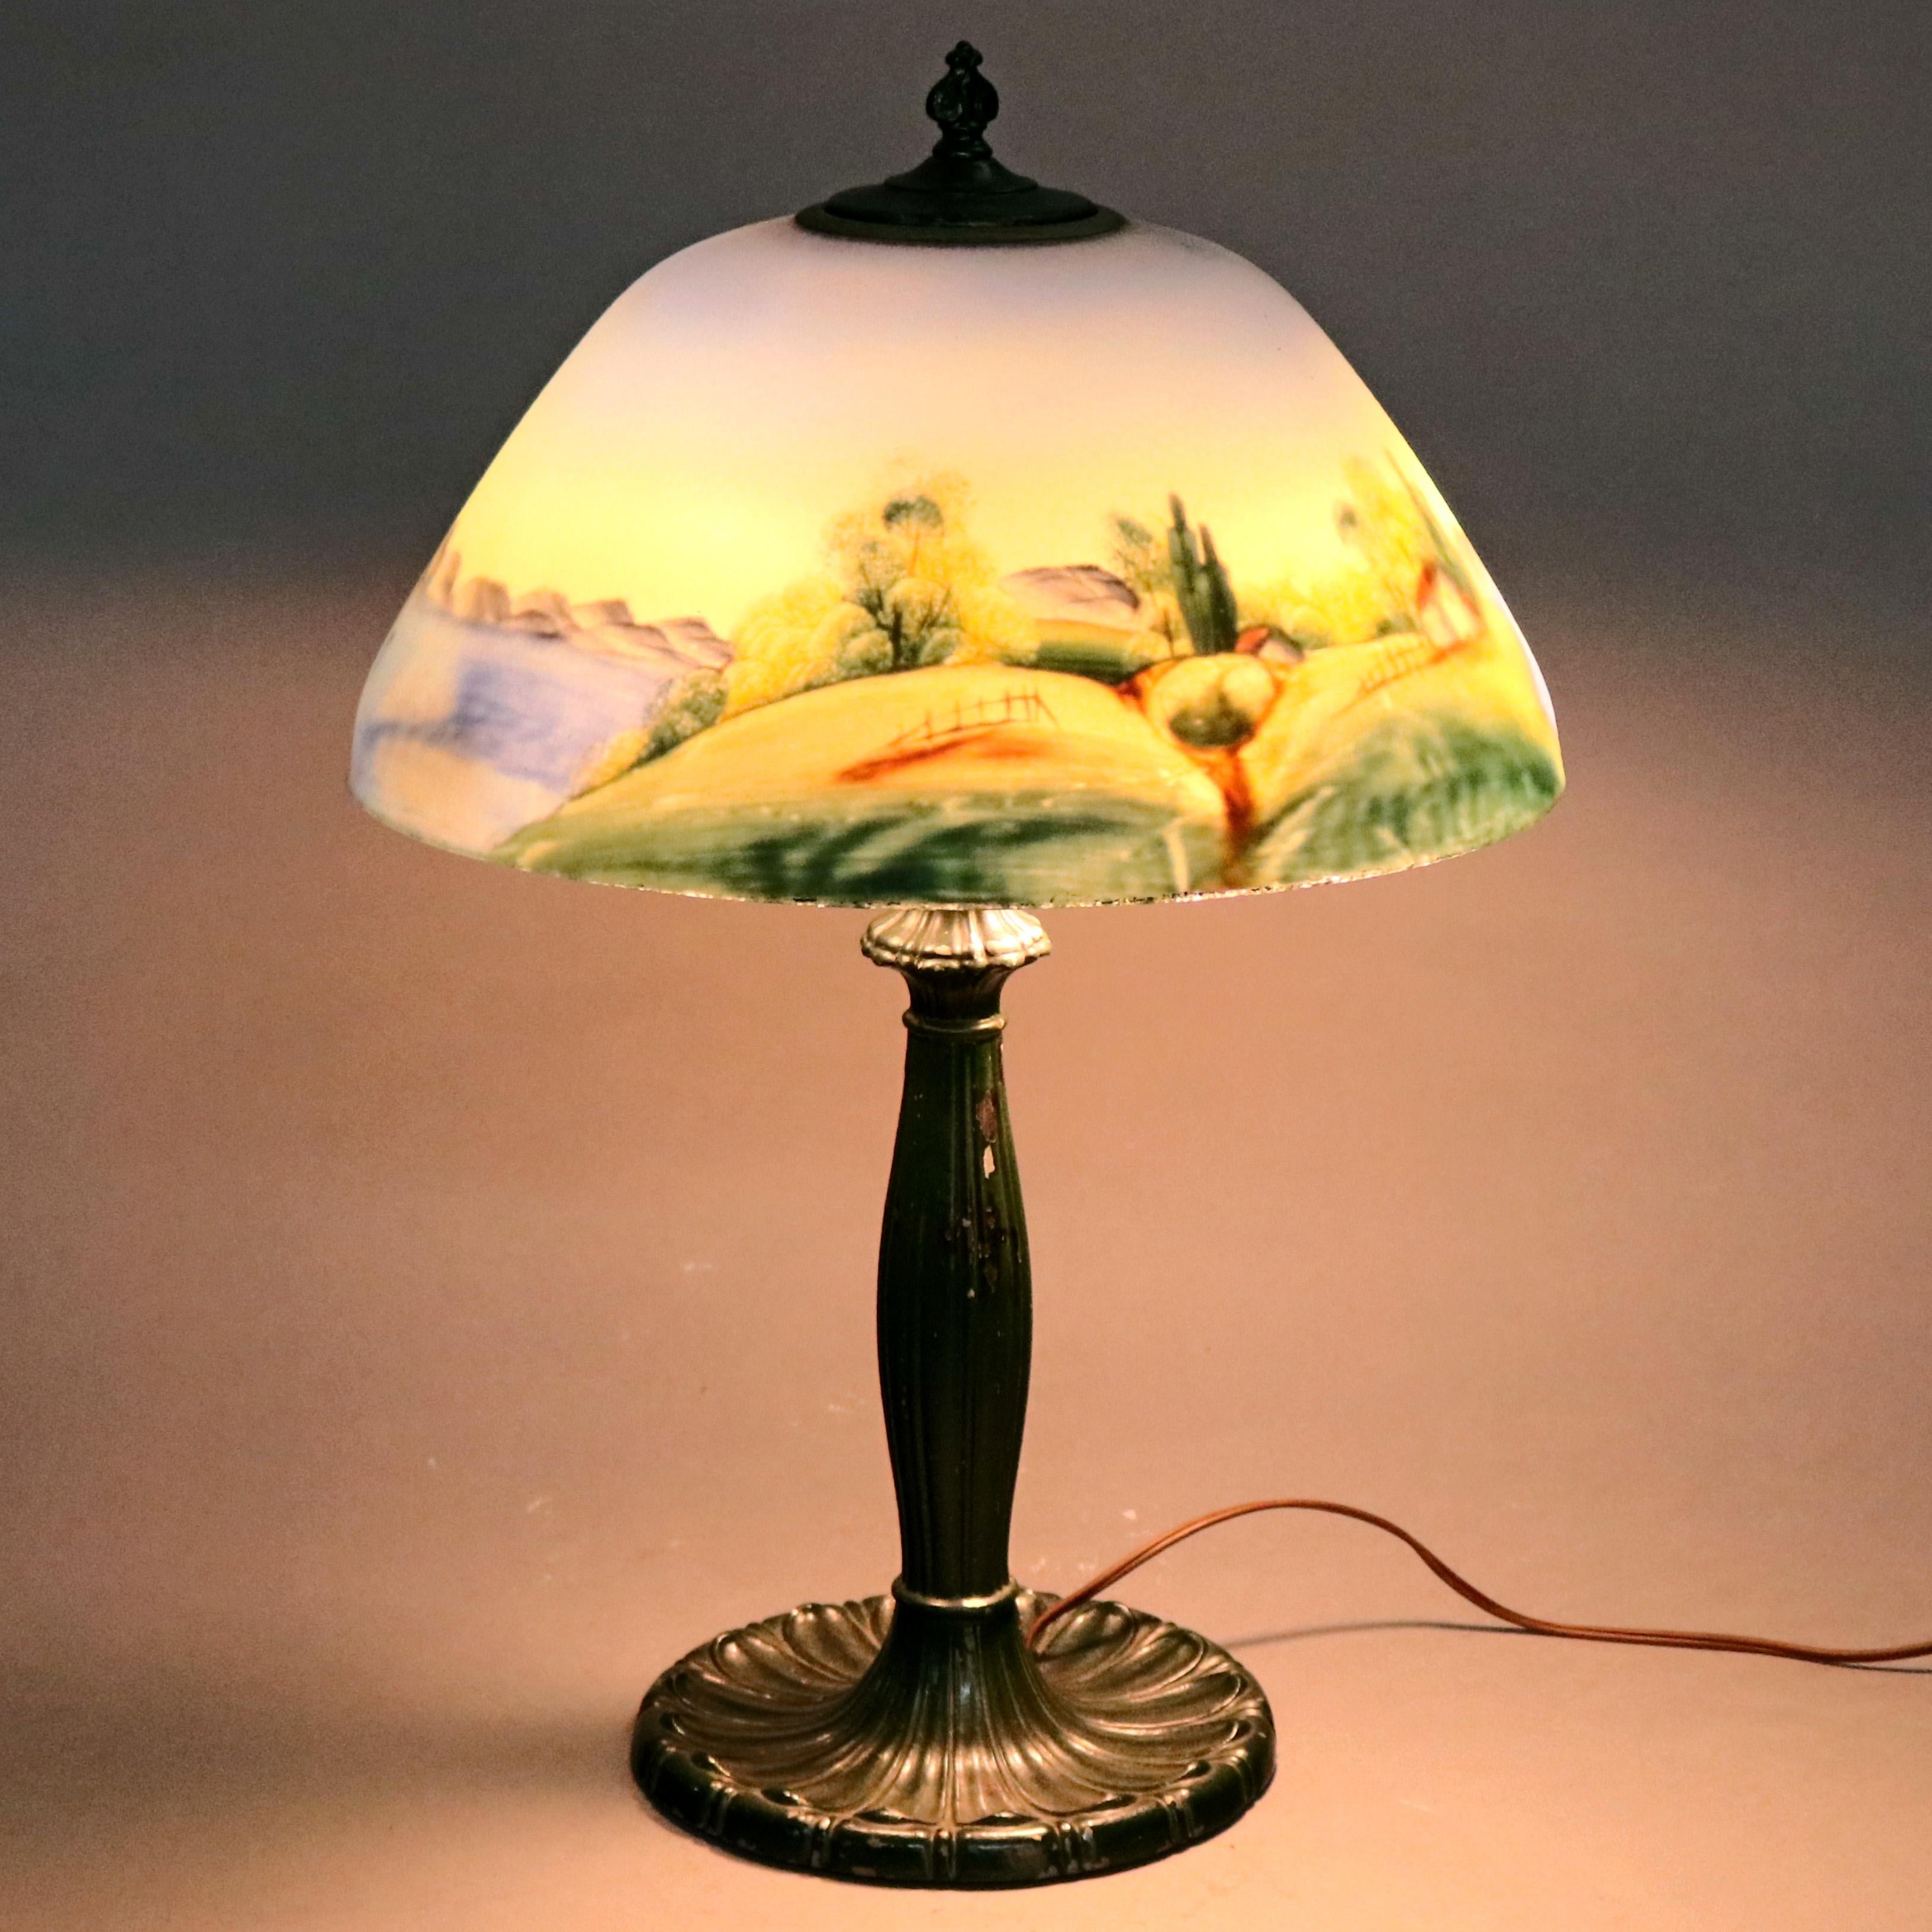 An antique Arts and Crafts Pairpoint School table lamp offers reverse painted glass shade with landscape scene having cottage in countryside setting, raised on cast base with independently controlled double sockets, c1920

Measures - 17.5